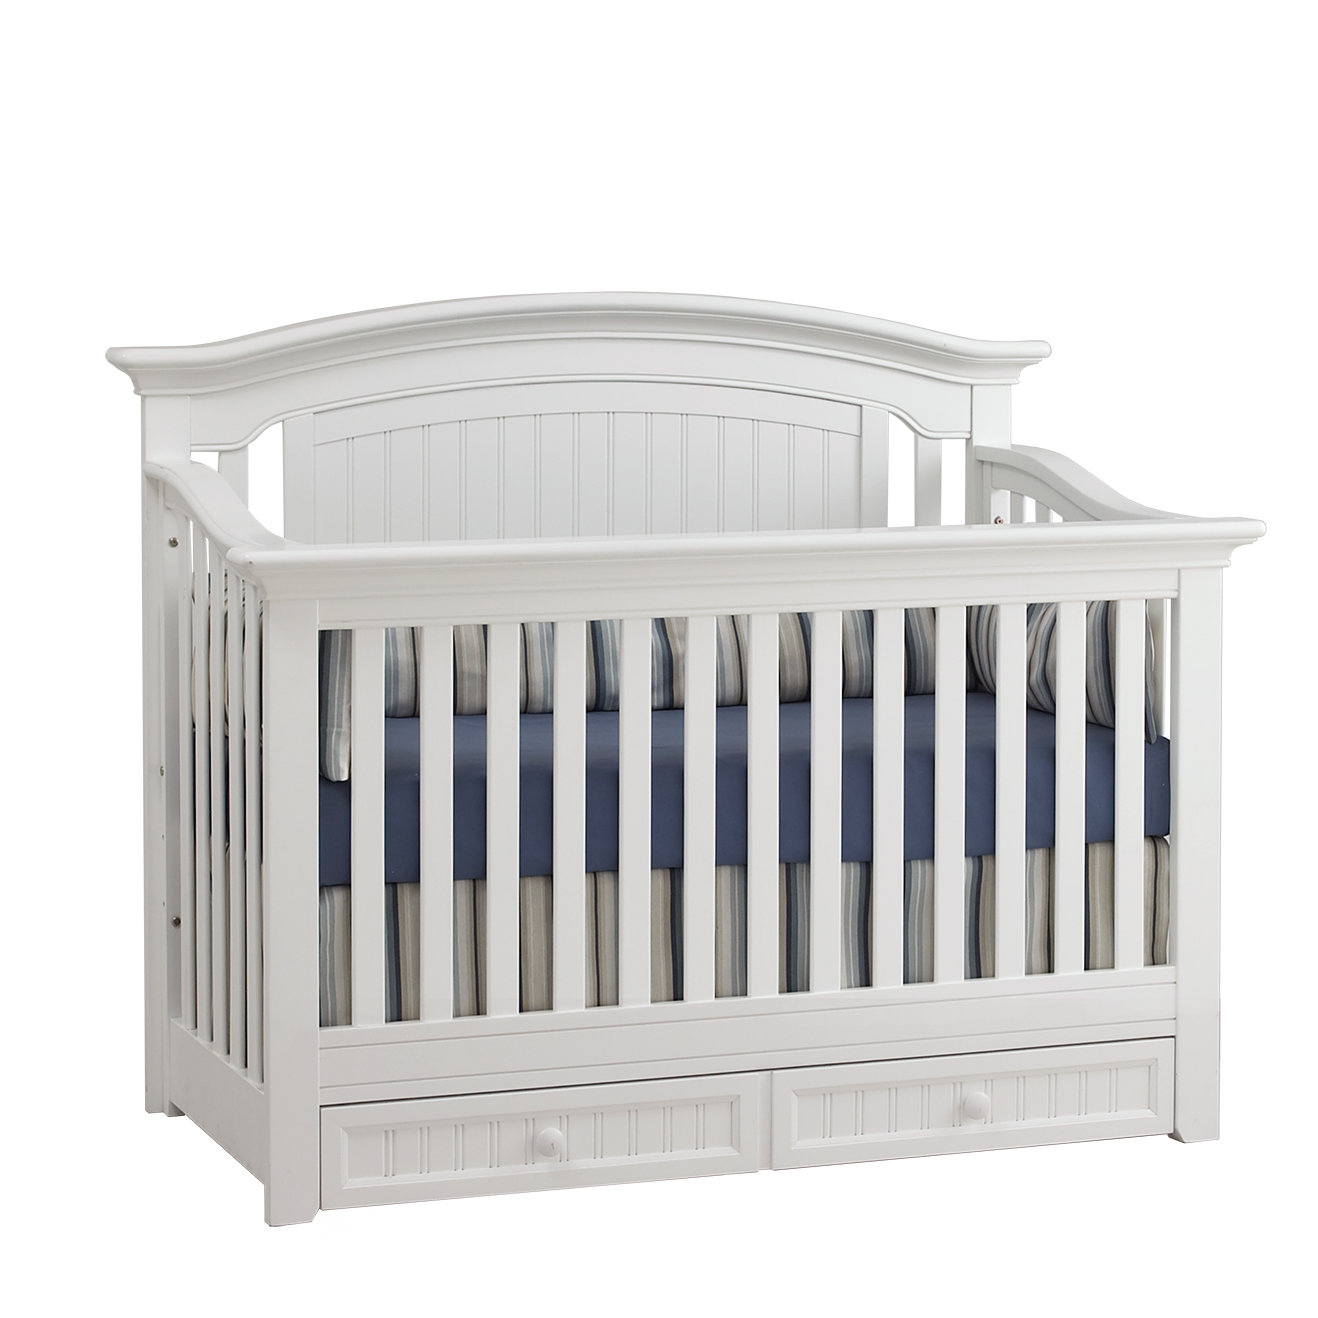 cribs with storage underneath winchester 4-in-1 convertible crib PZYBESK